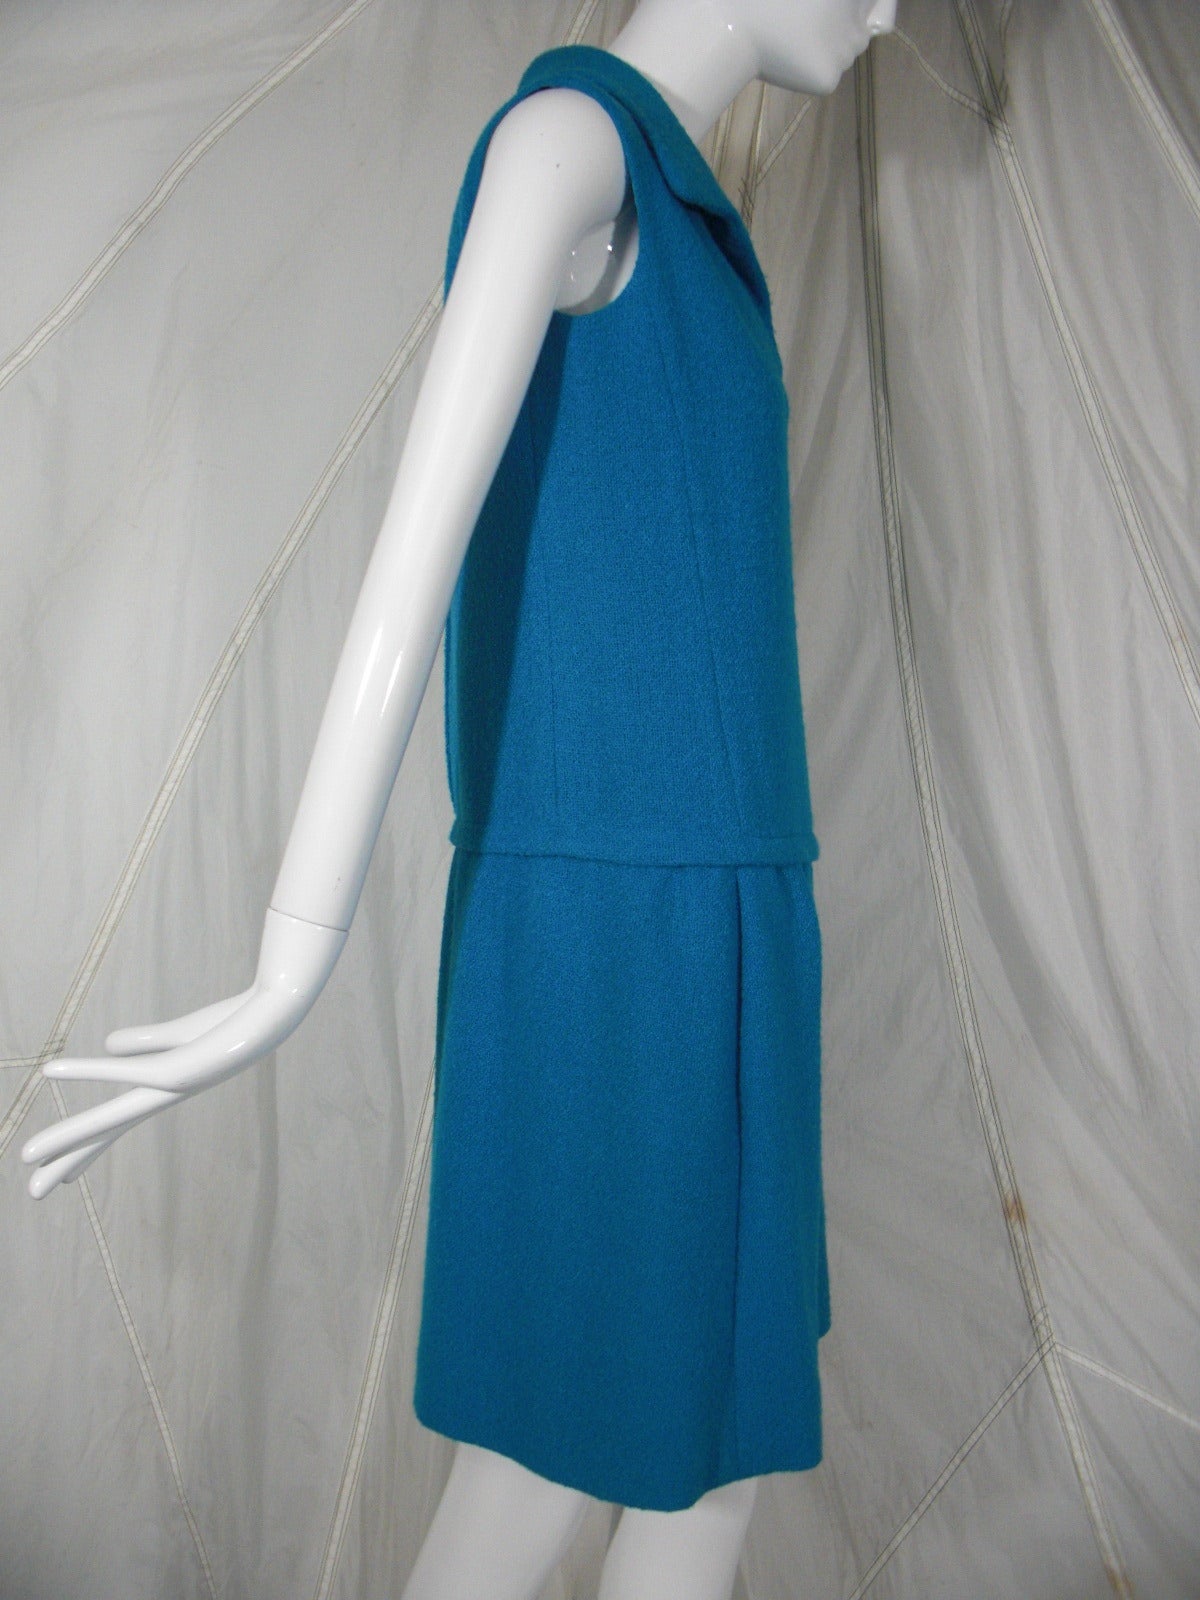 A sporty 1960s B. H. Wragge turquoise summer-weight wool dress with collar, drop-waist and 2 front slash pockets.  Fully lined.